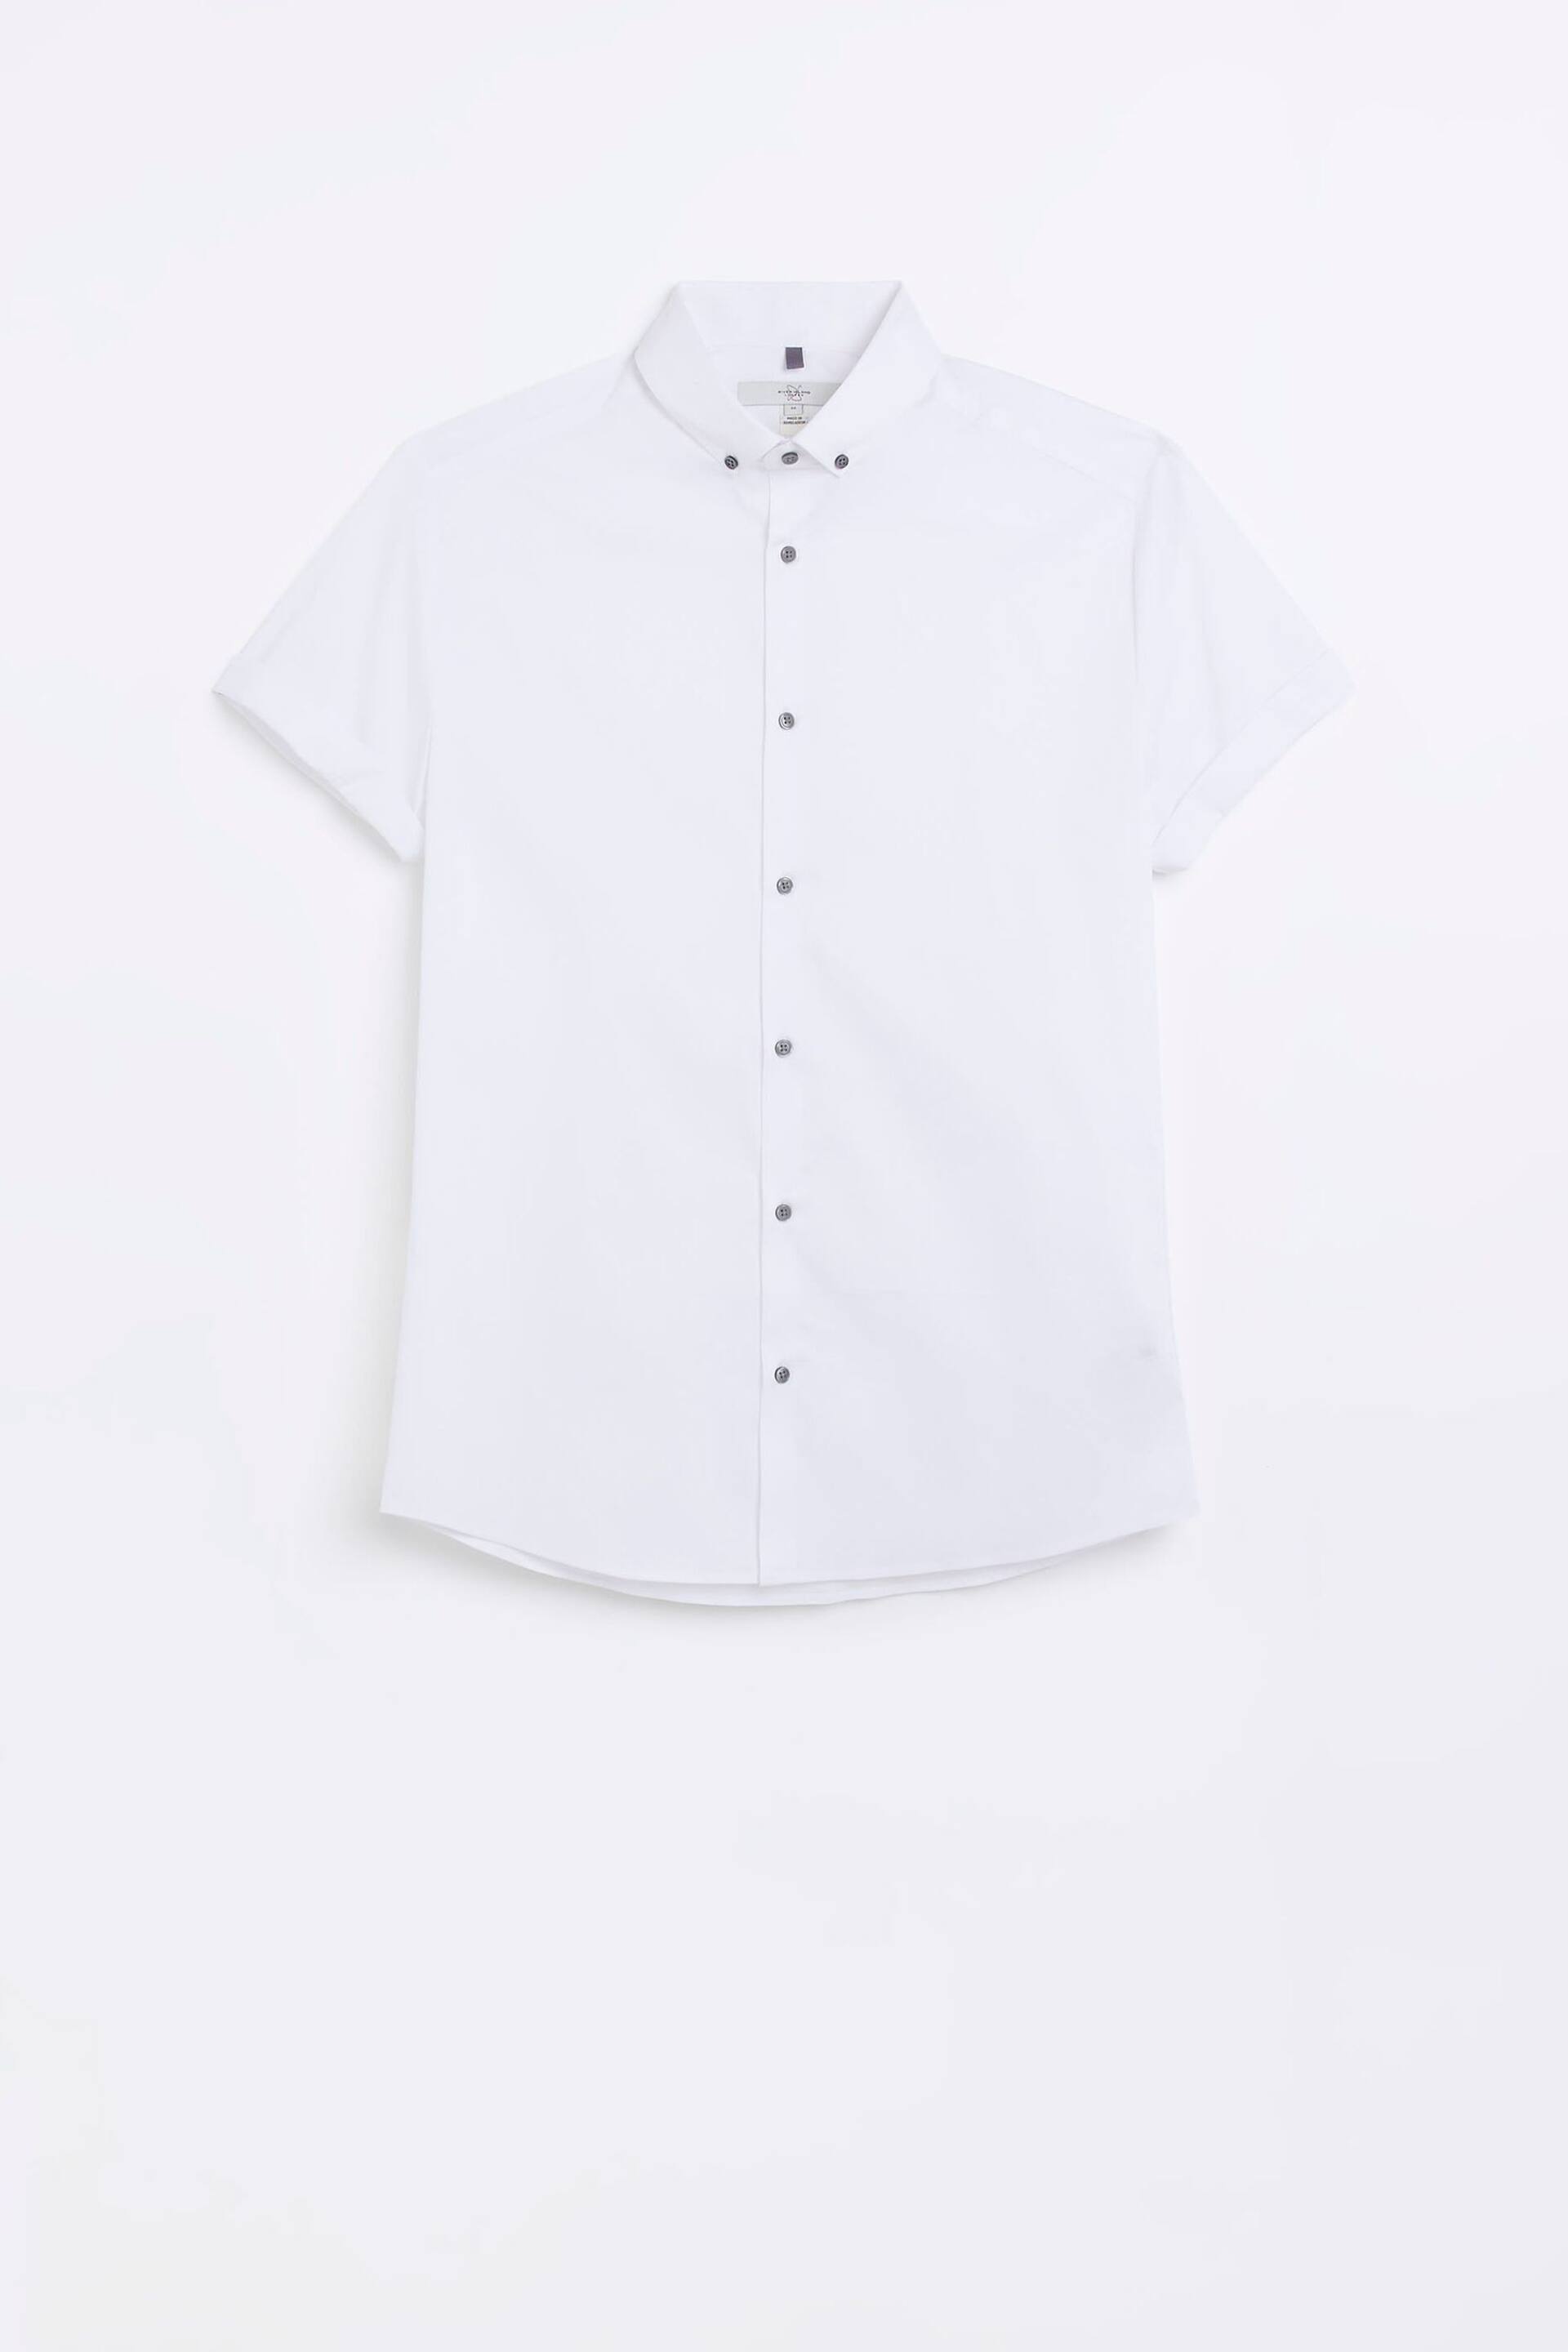 River Island Off white Muscle Fit Shirt - Image 5 of 6